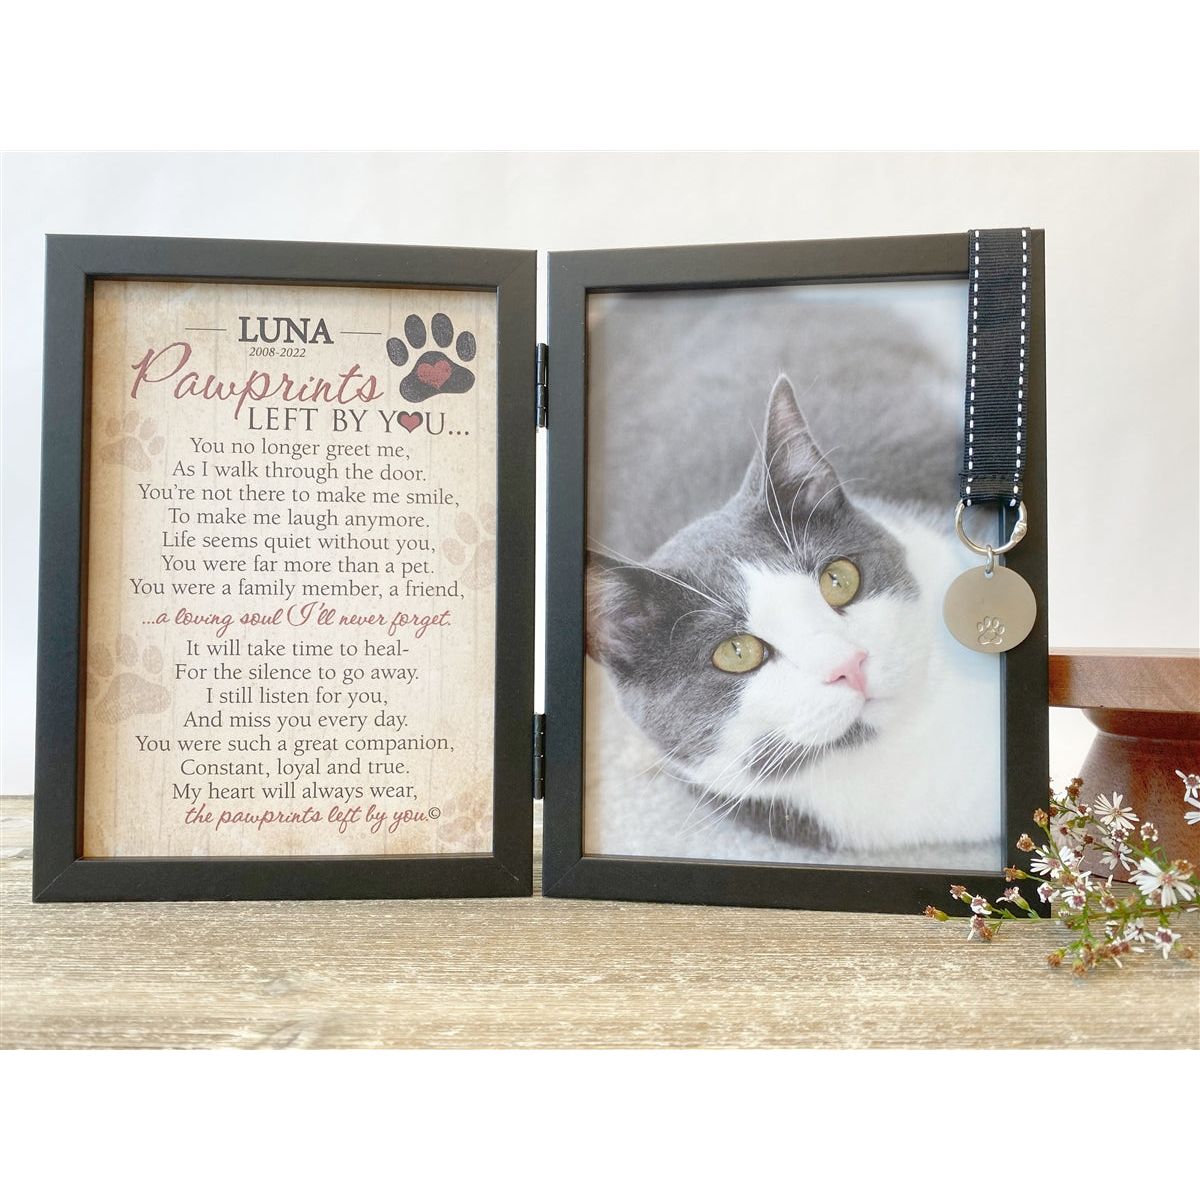 Personalized Pawprints Pet Loss Memorial Frame: Pawprints Left by You Cat